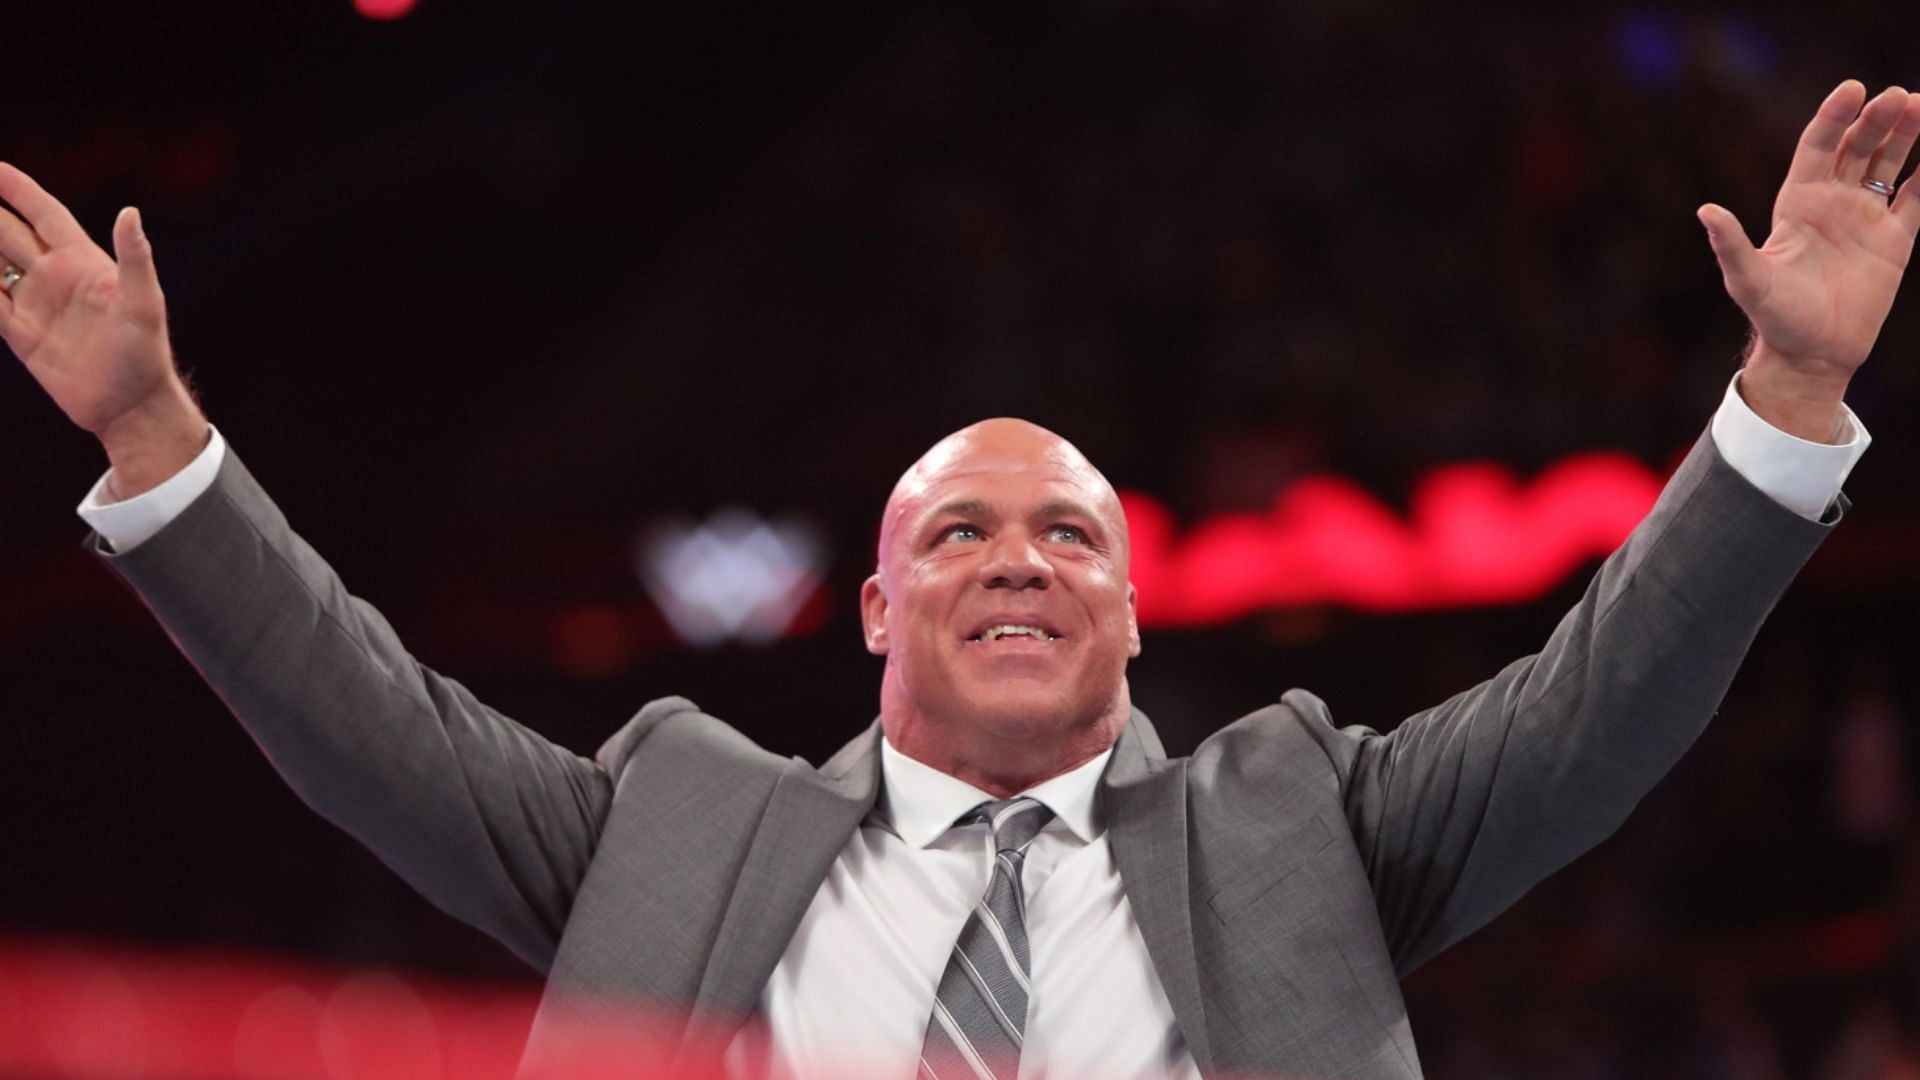 "I think it's a great idea" - Kurt Angle praises WWE for changes made to Survivor Series